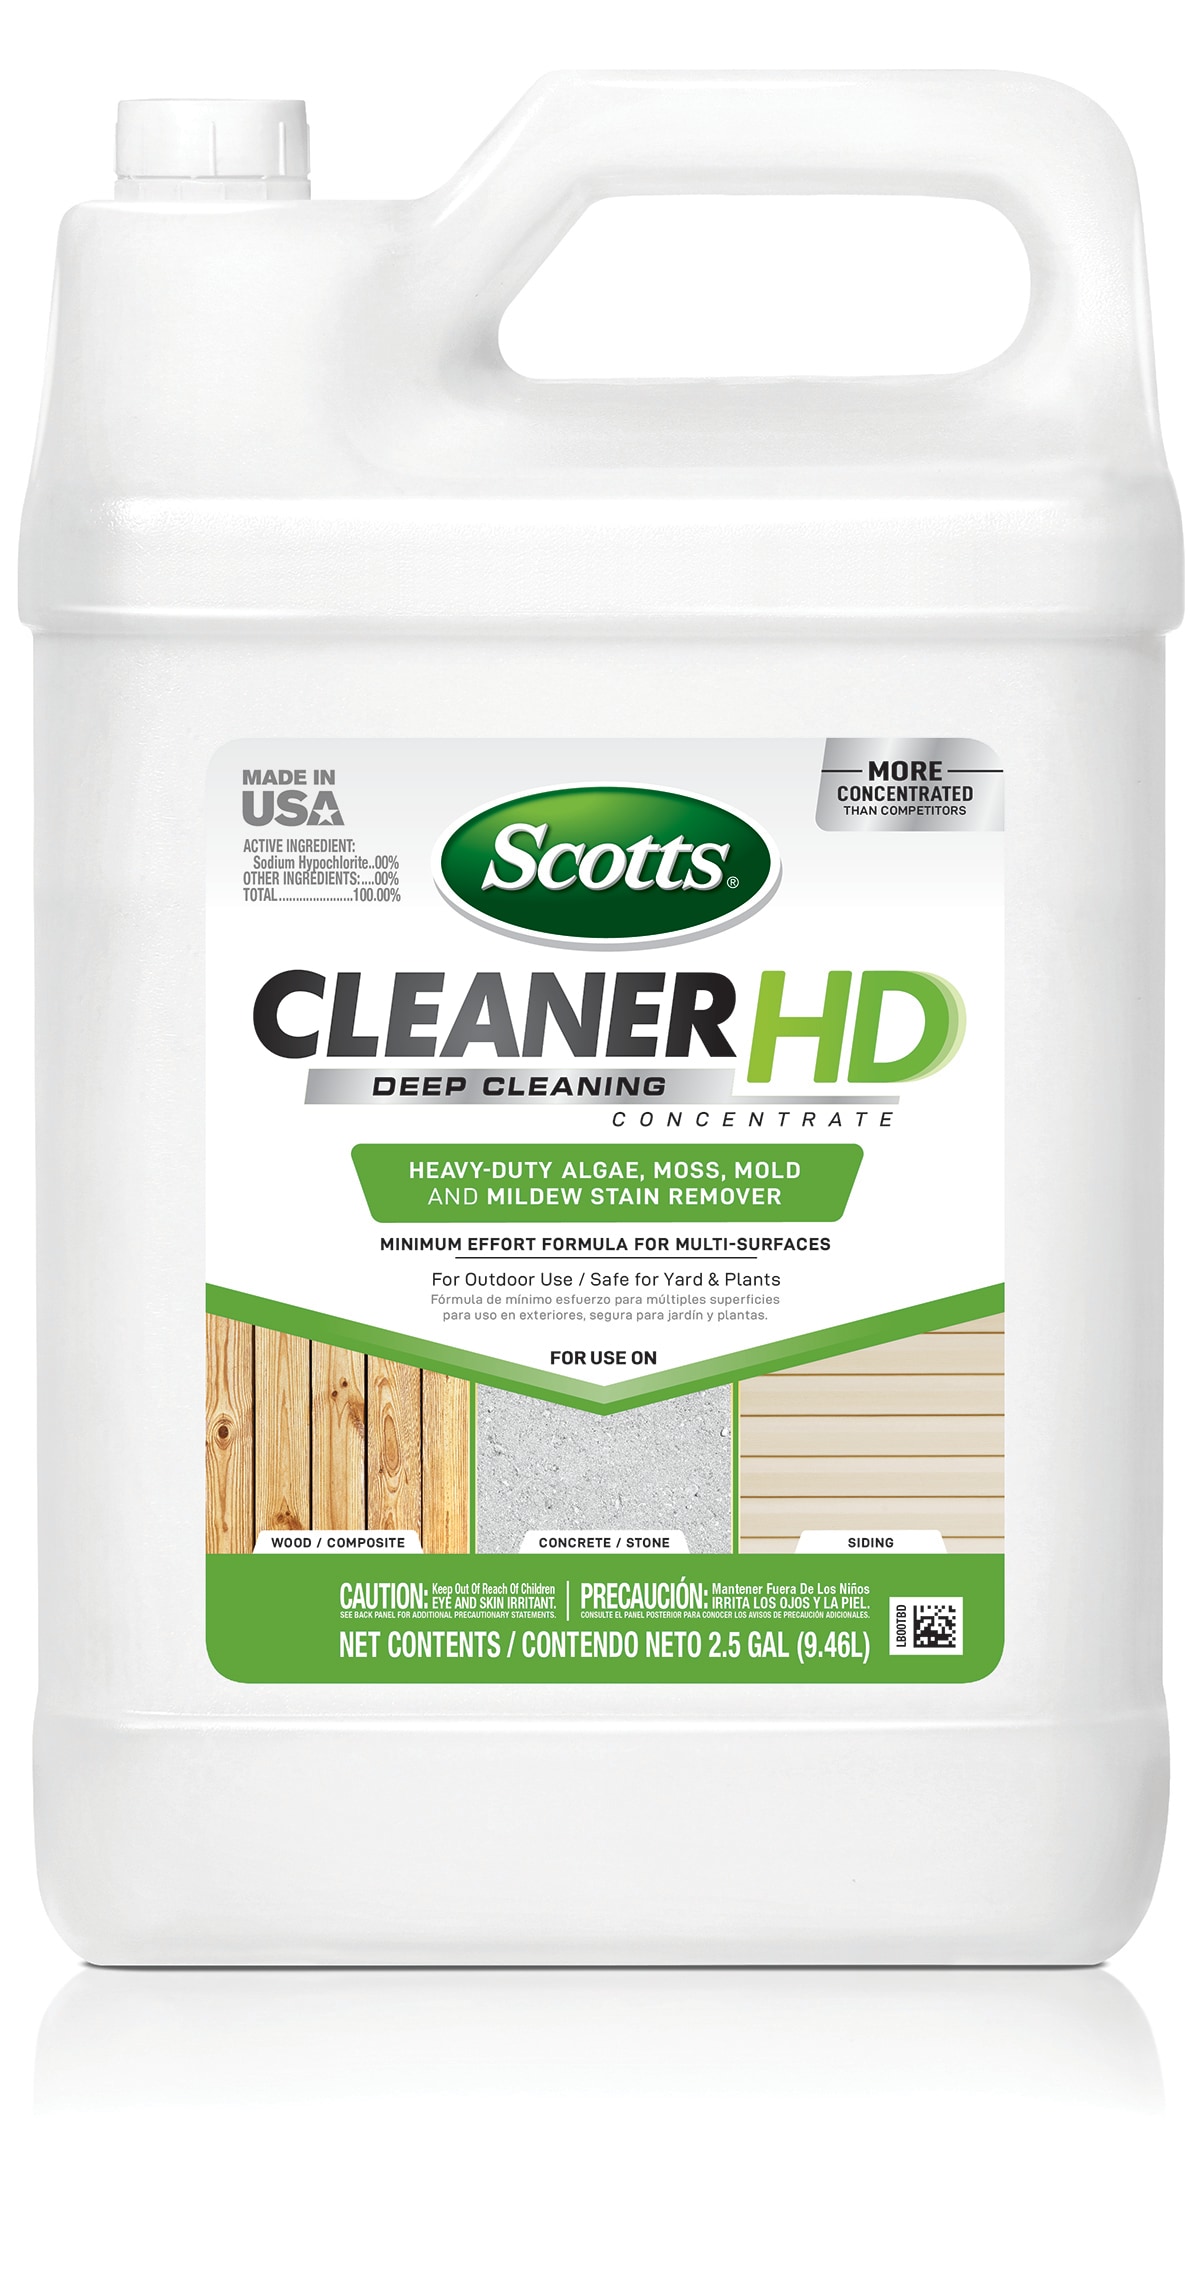  Scott's 51070 1 Gal Outdoor Cleaner Plus OXI Clean